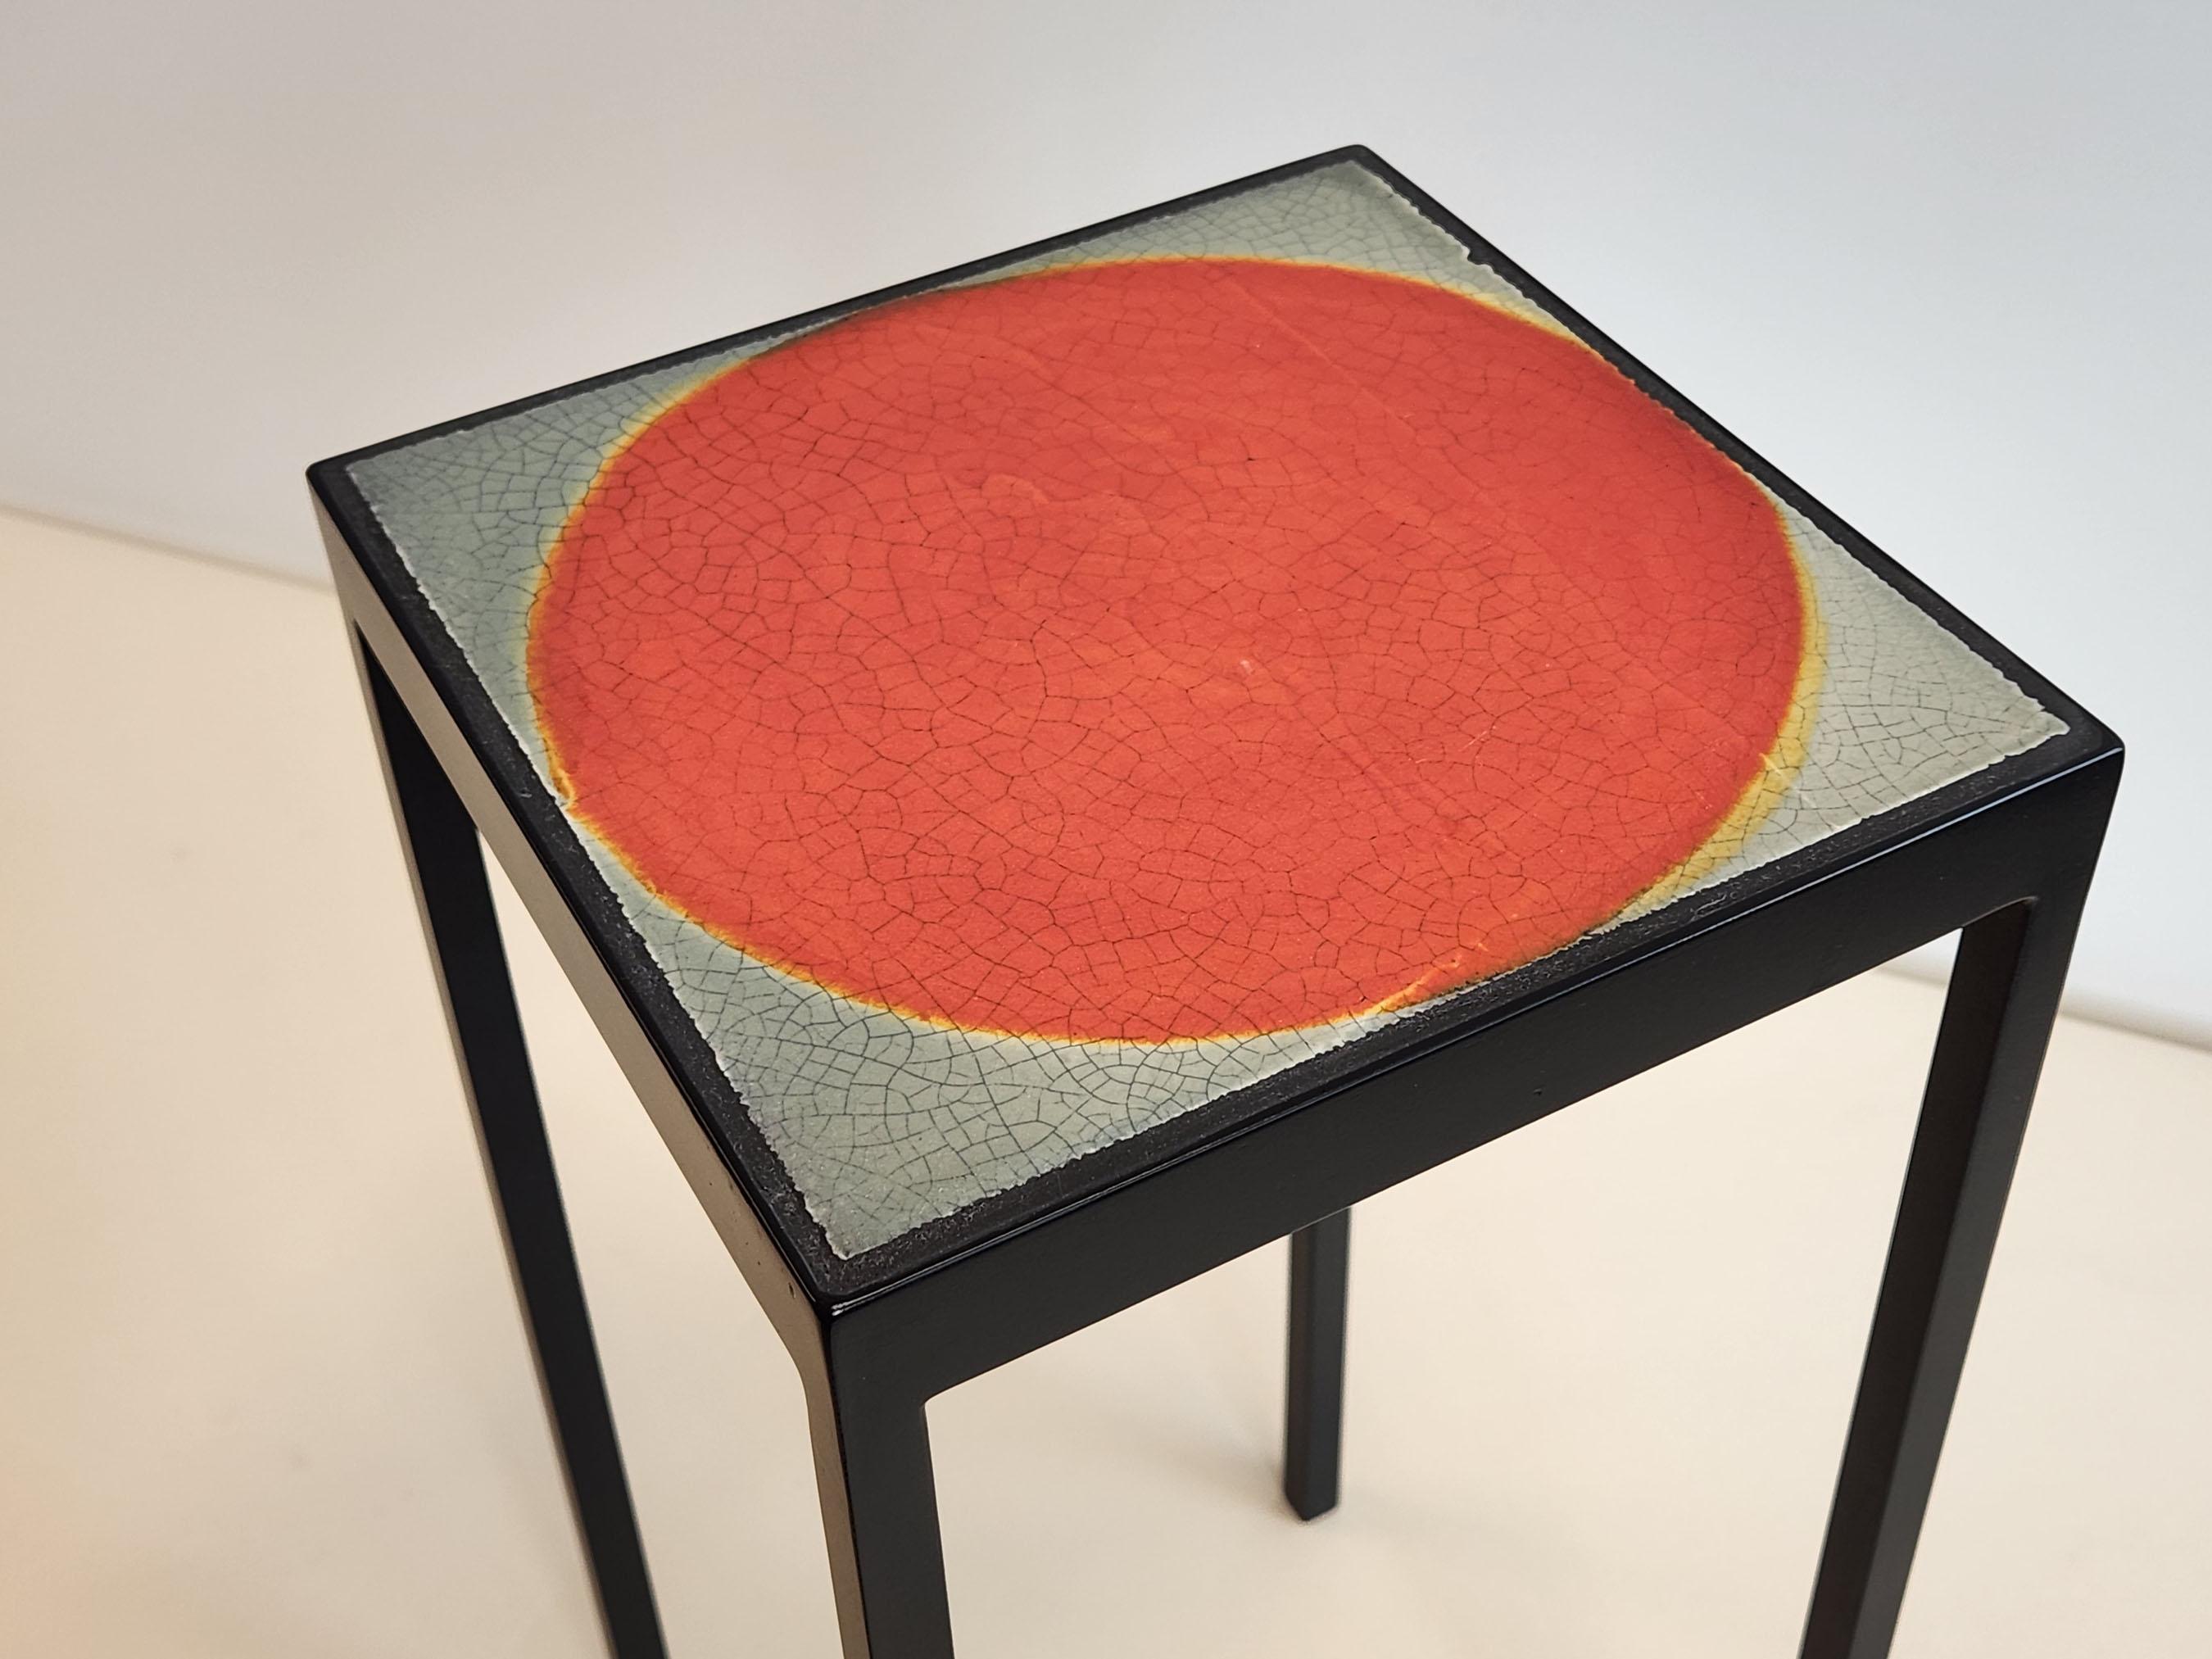 These side tables feature new painted steel frames and a vintage lava tile from Roger Capron. Made in 1970s, these tiles vary in color and texture, resulting from the hand glazed process.

Custom tables available upon request.- Client can pick the